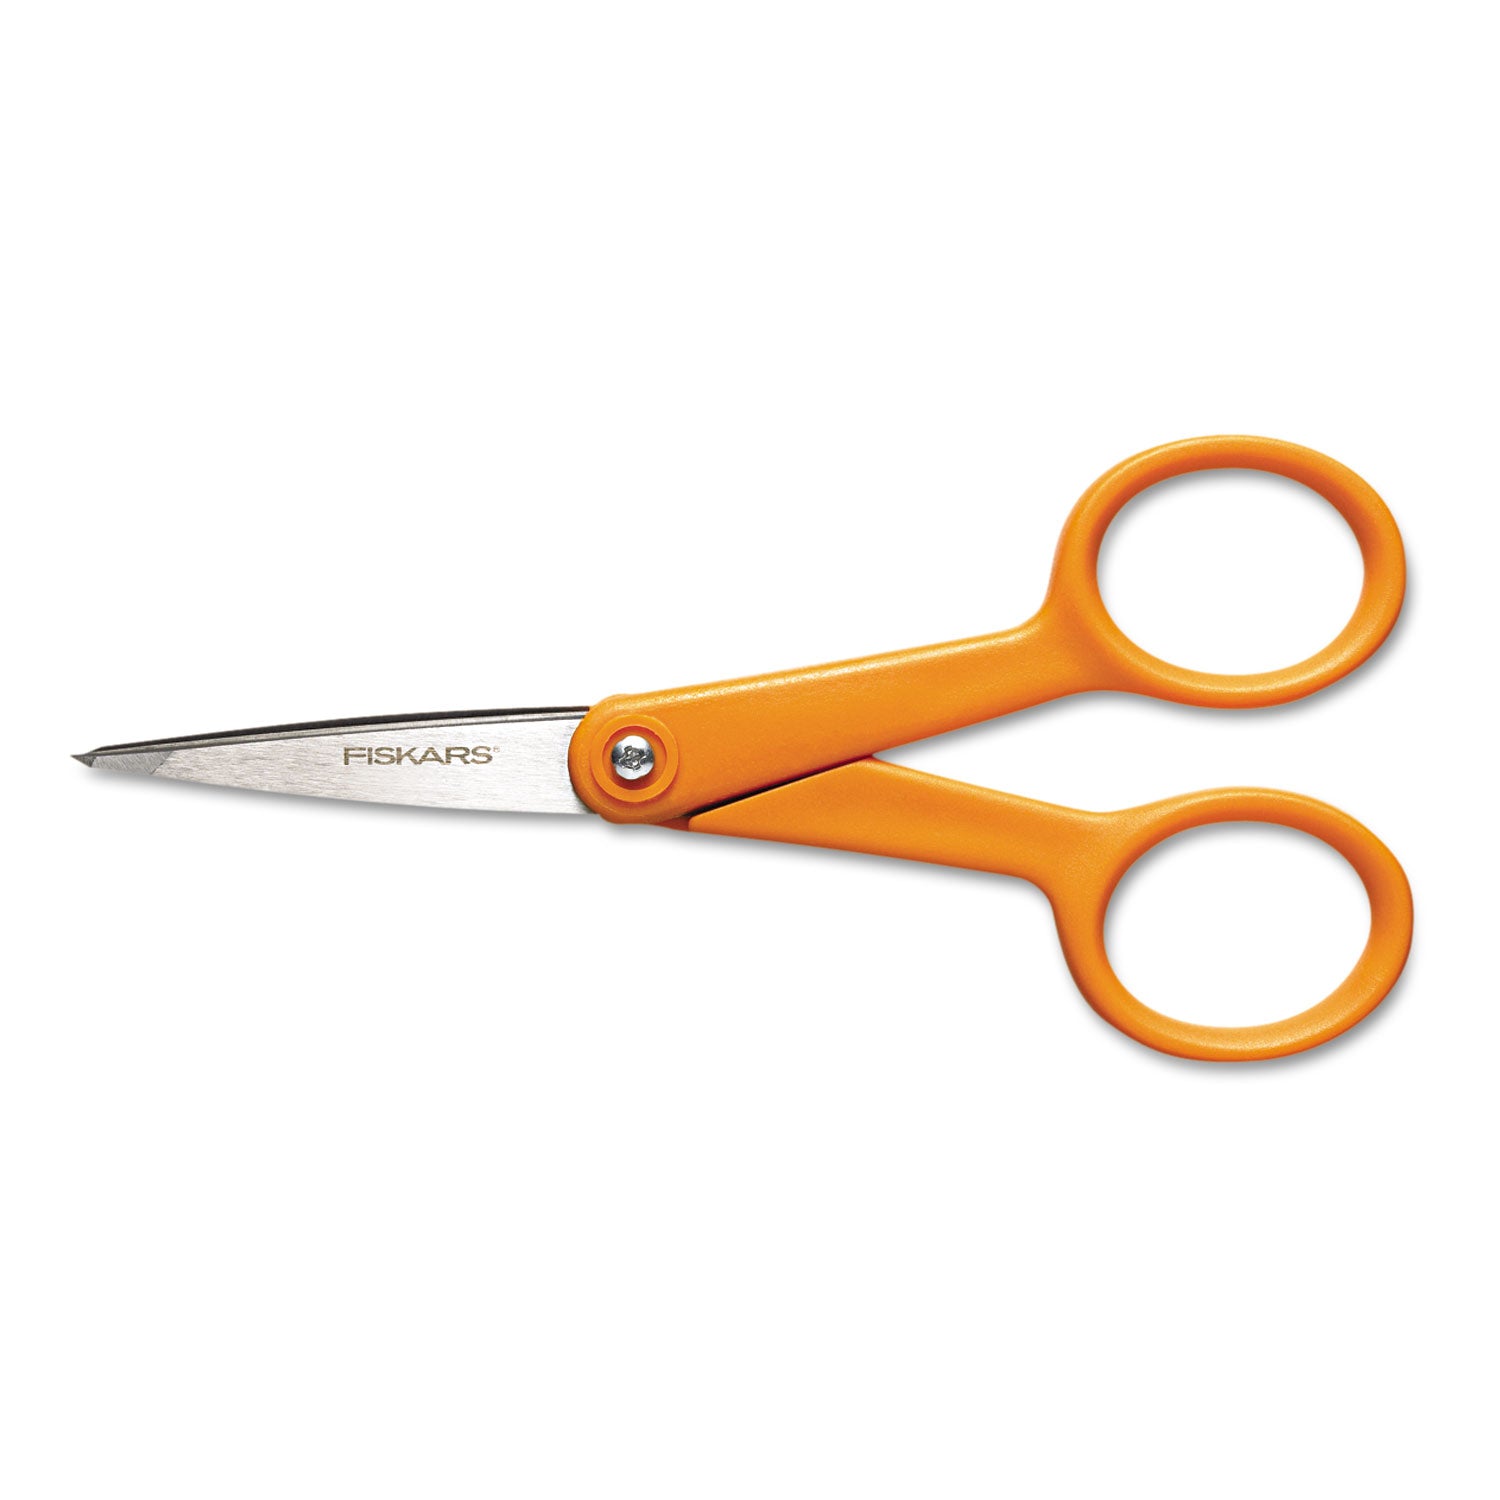 home-and-office-scissors-pointed-tip-5-long-188-cut-length-orange-straight-handle_fsk1948101015 - 1